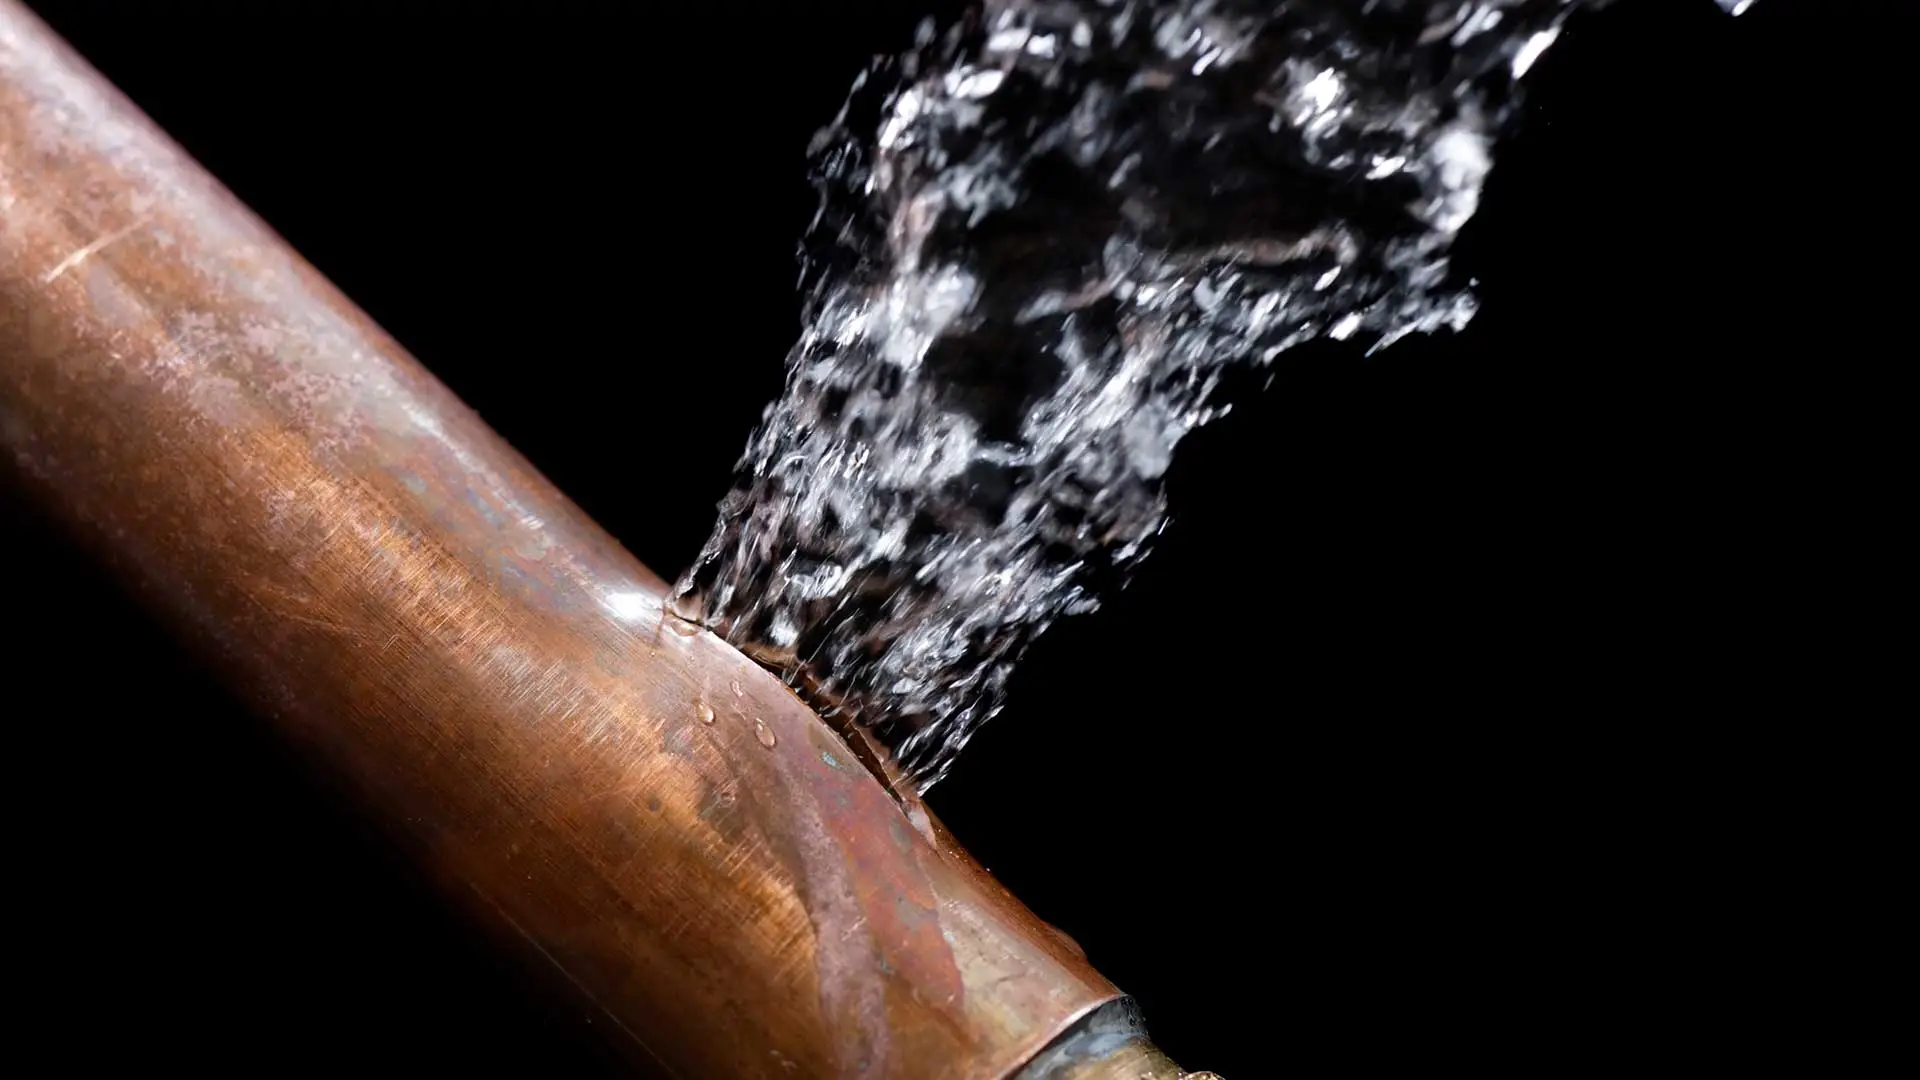 How to Detect a Water Leak Without Destroying Your Home